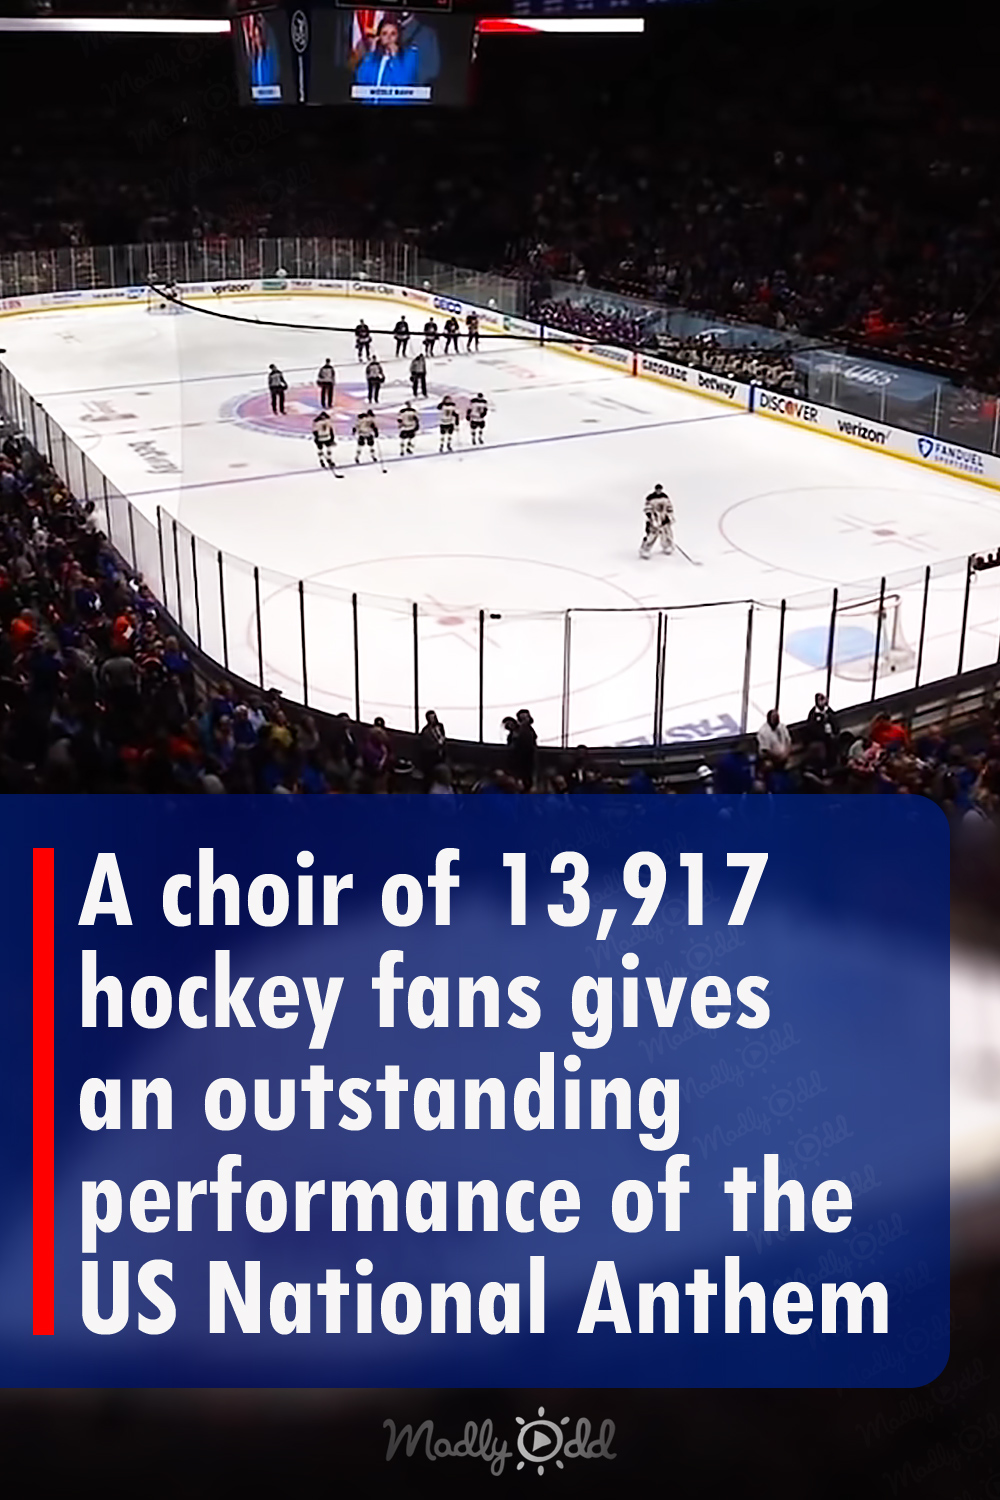 A choir of 13,917 hockey fans gives an outstanding performance of the US National Anthem